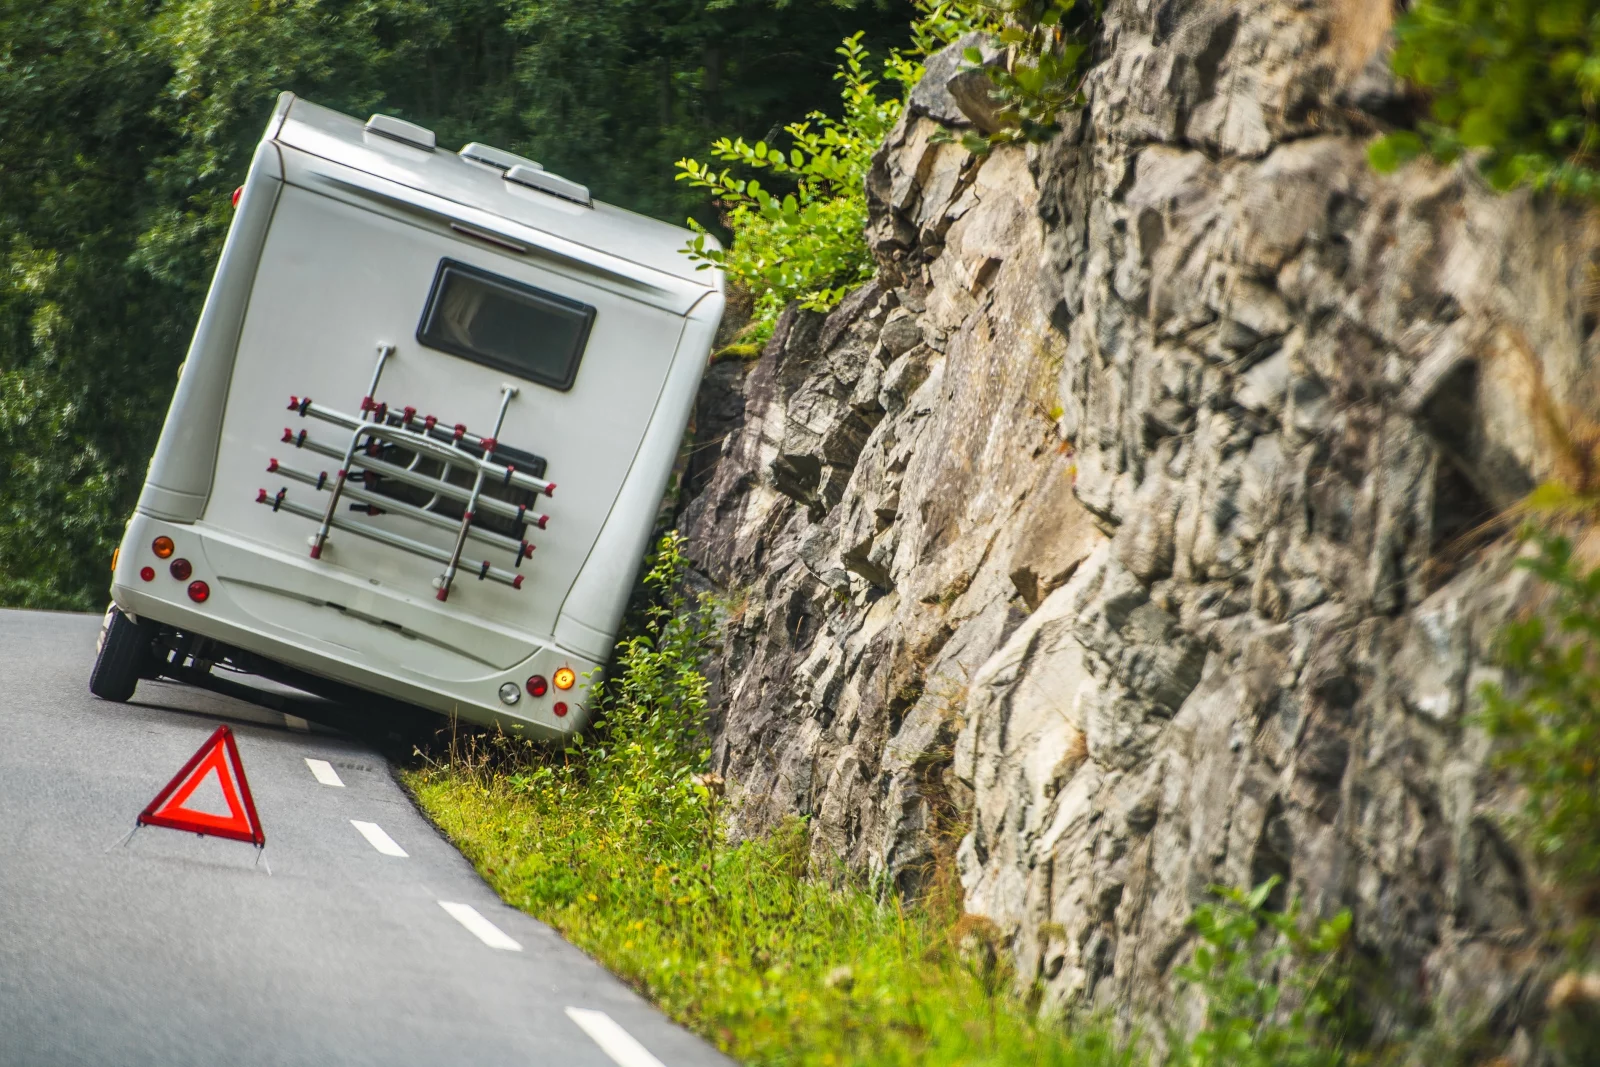 Top 10 Reasons to Avoid Shared RV Rentals